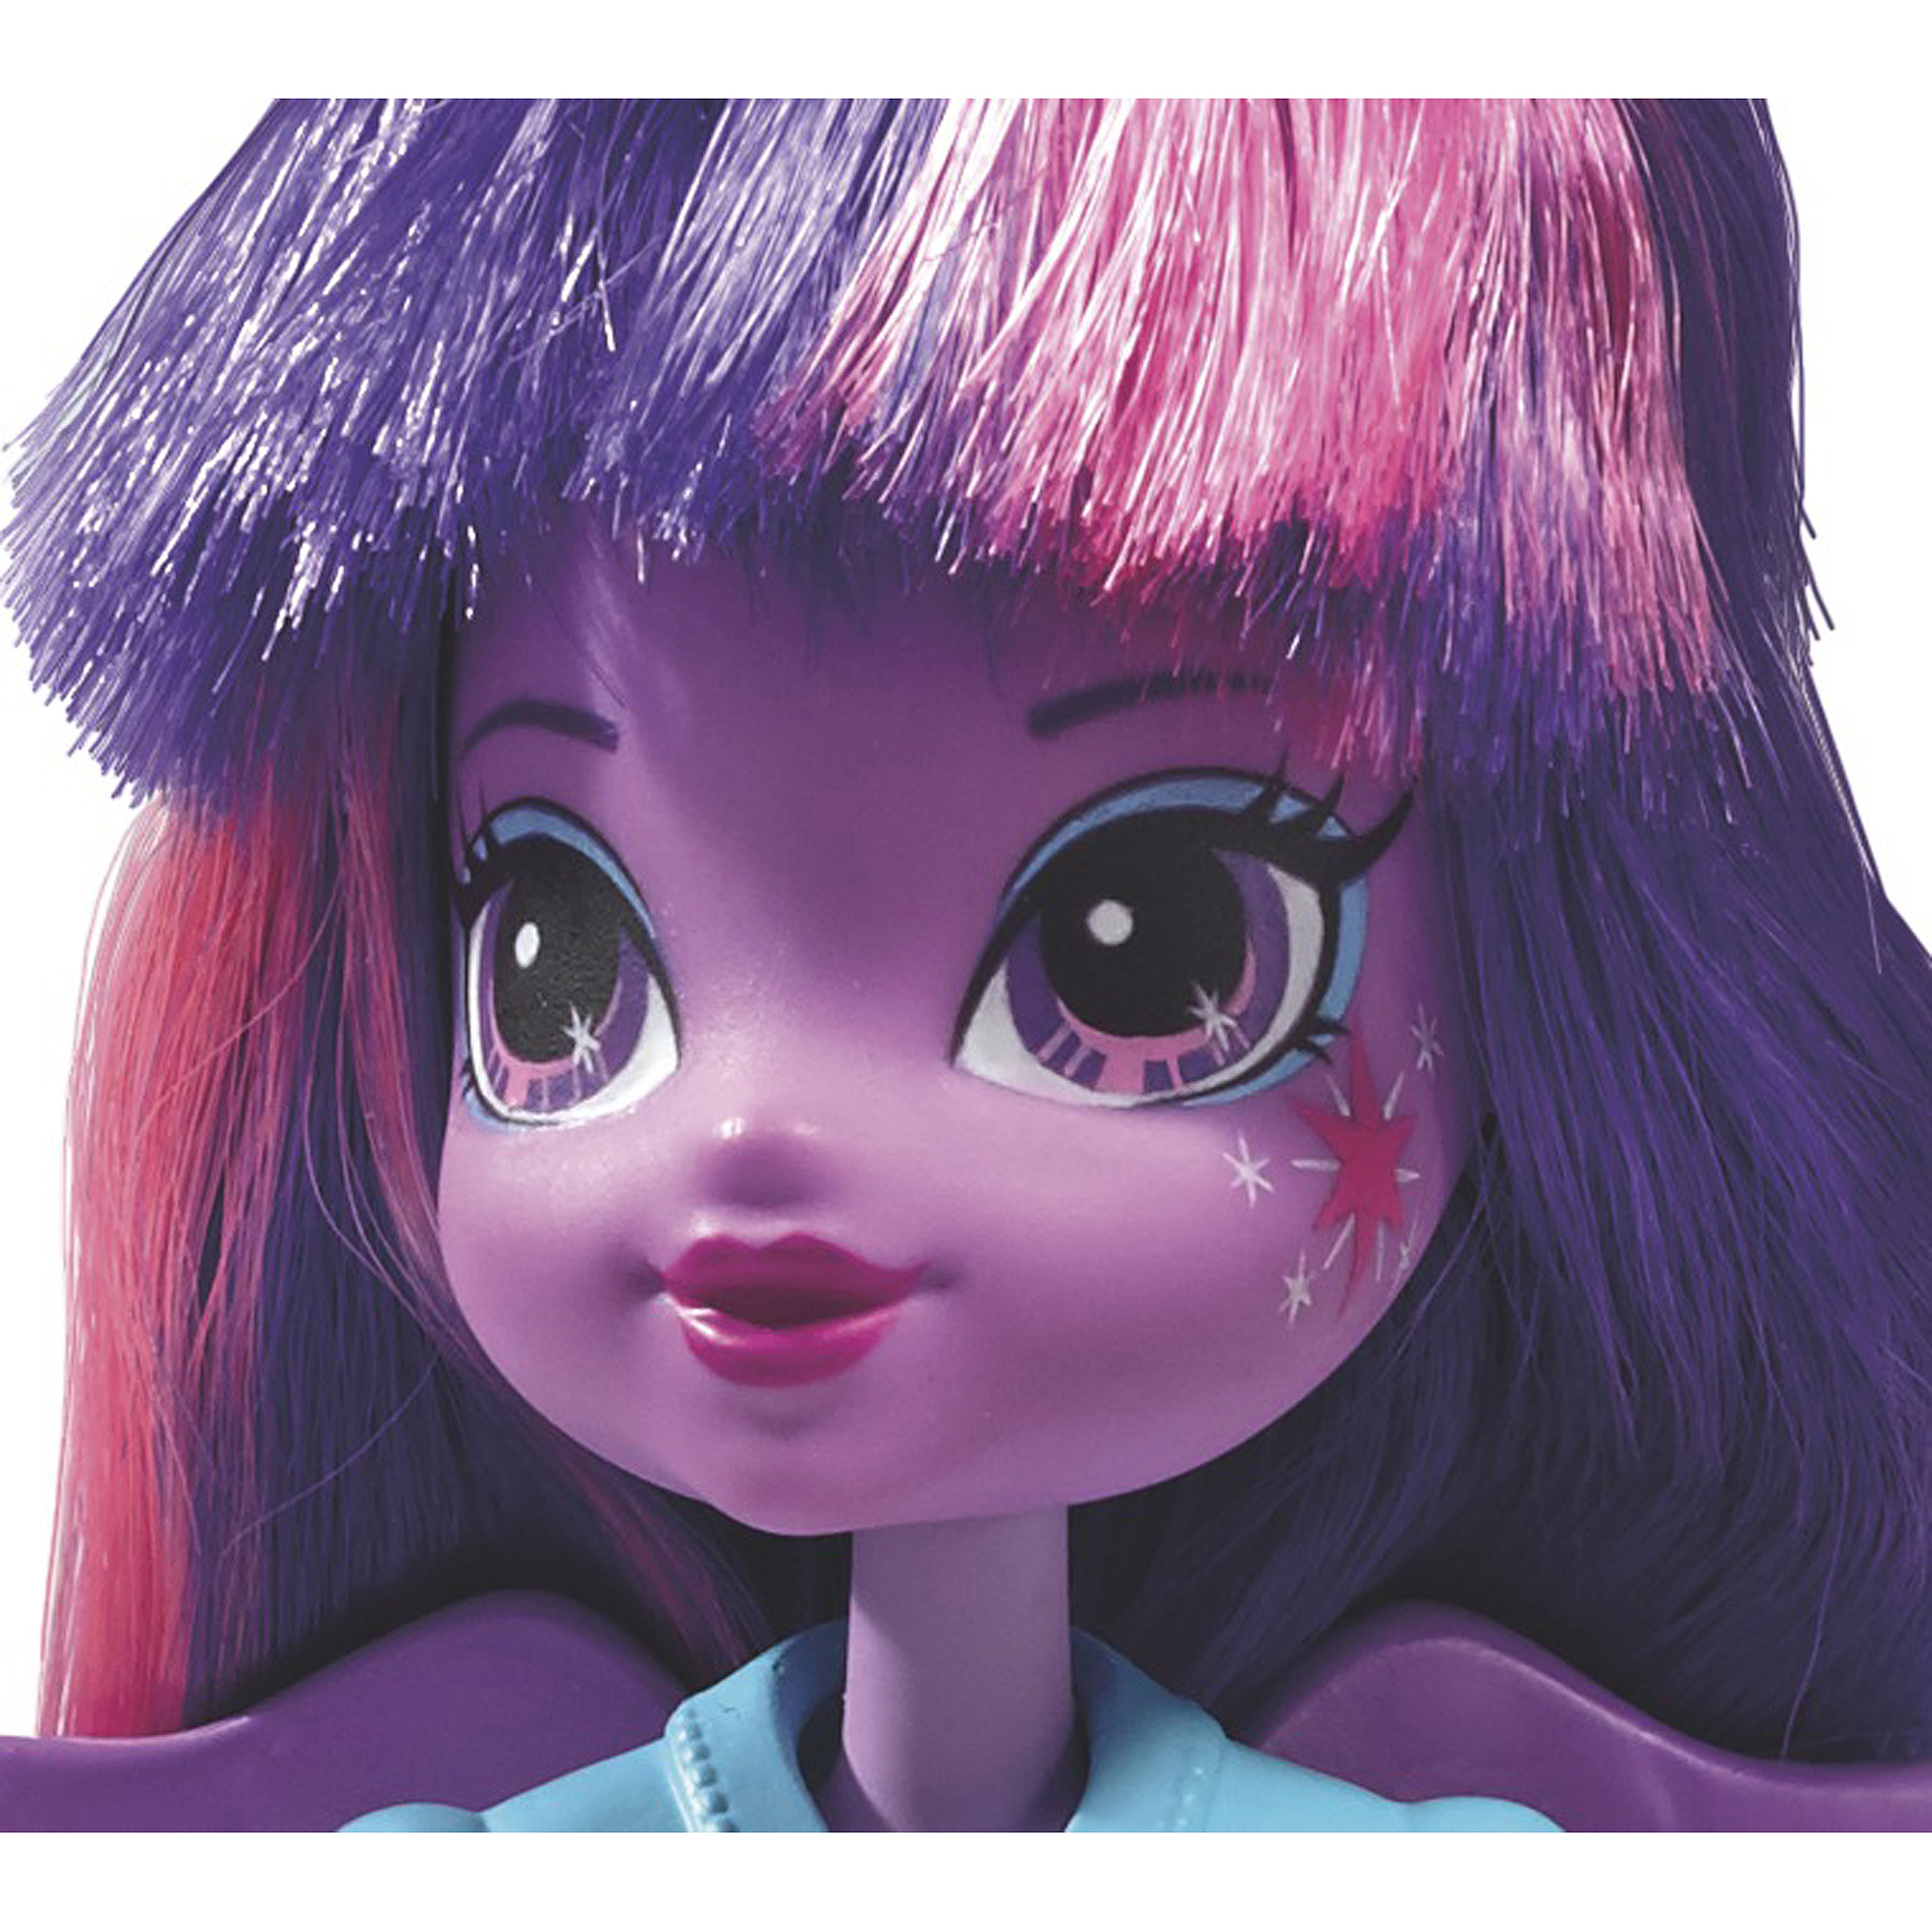 My Little Pony Equestria Girls Collection Twilight Sparkle Doll - image 5 of 10